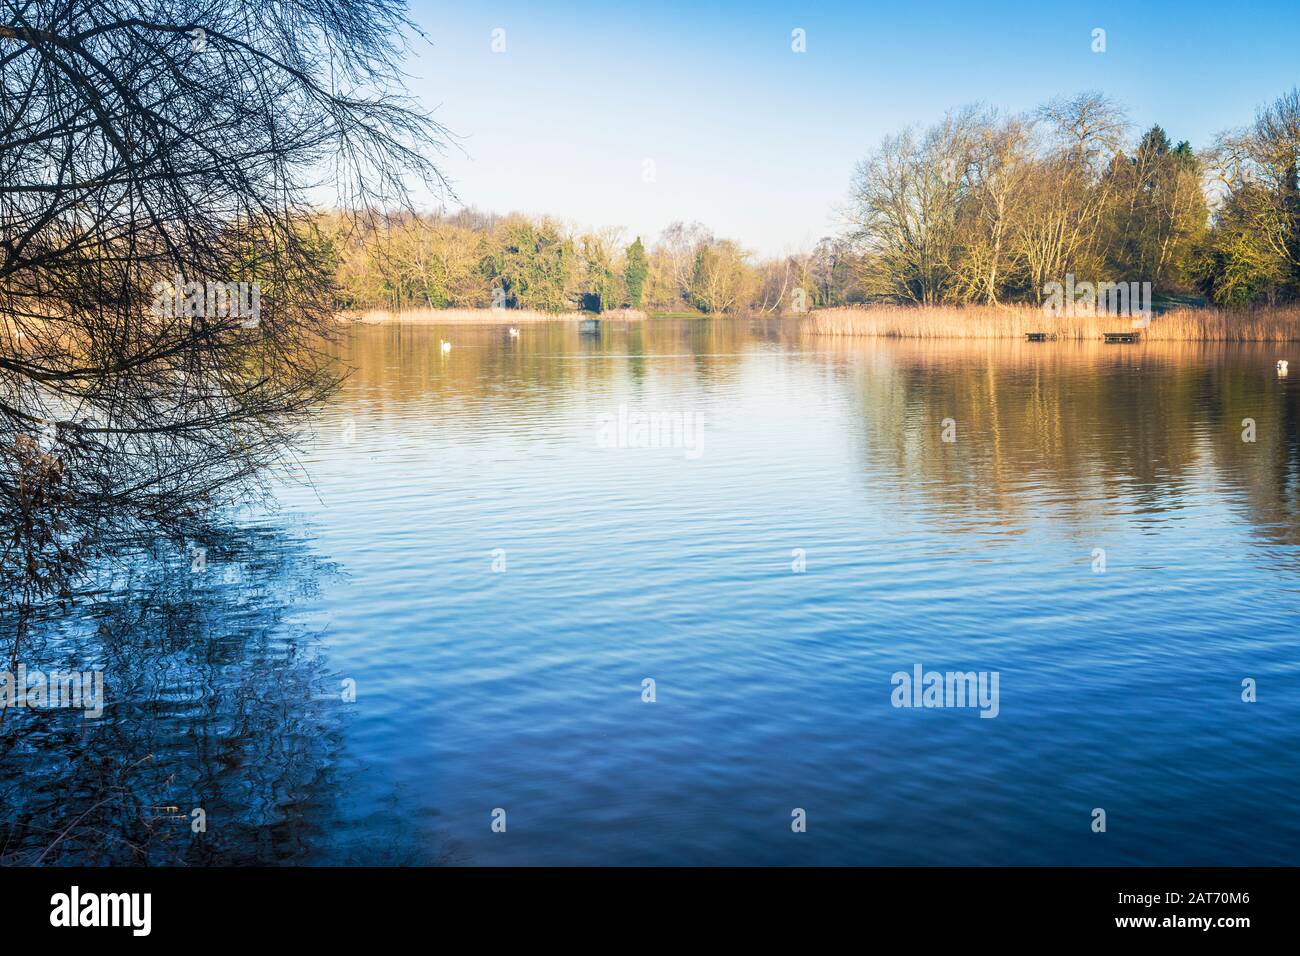 An early winter's morning at Coate Water in Swindon. Stock Photo